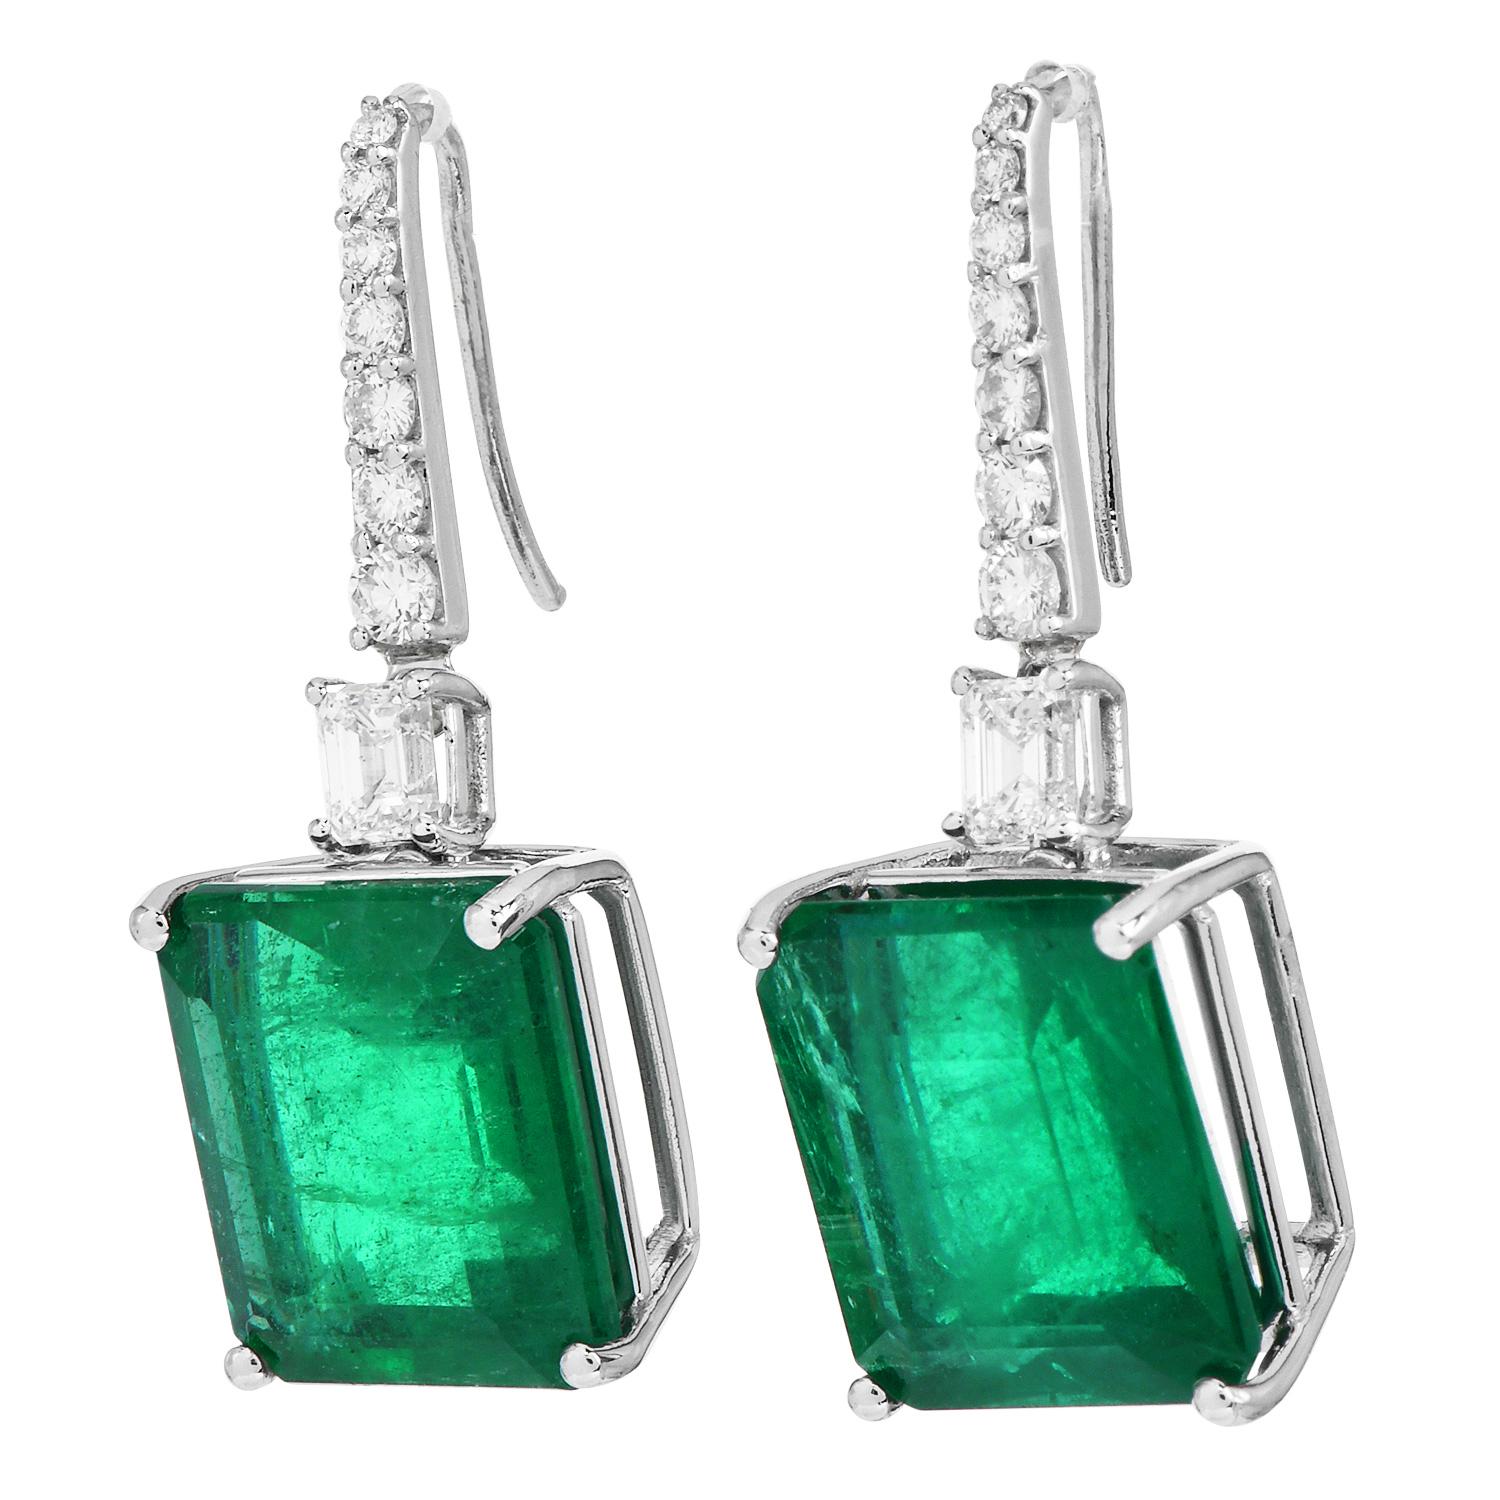 Celebrate yourself with these lovely sparkly dangle drop earrings, perfect for special occasions.

These earrings are crafted in solid 18k white gold, displaying two genuine emerald-cut emeralds weighing approx. 27.75 carats in total.

Round, and